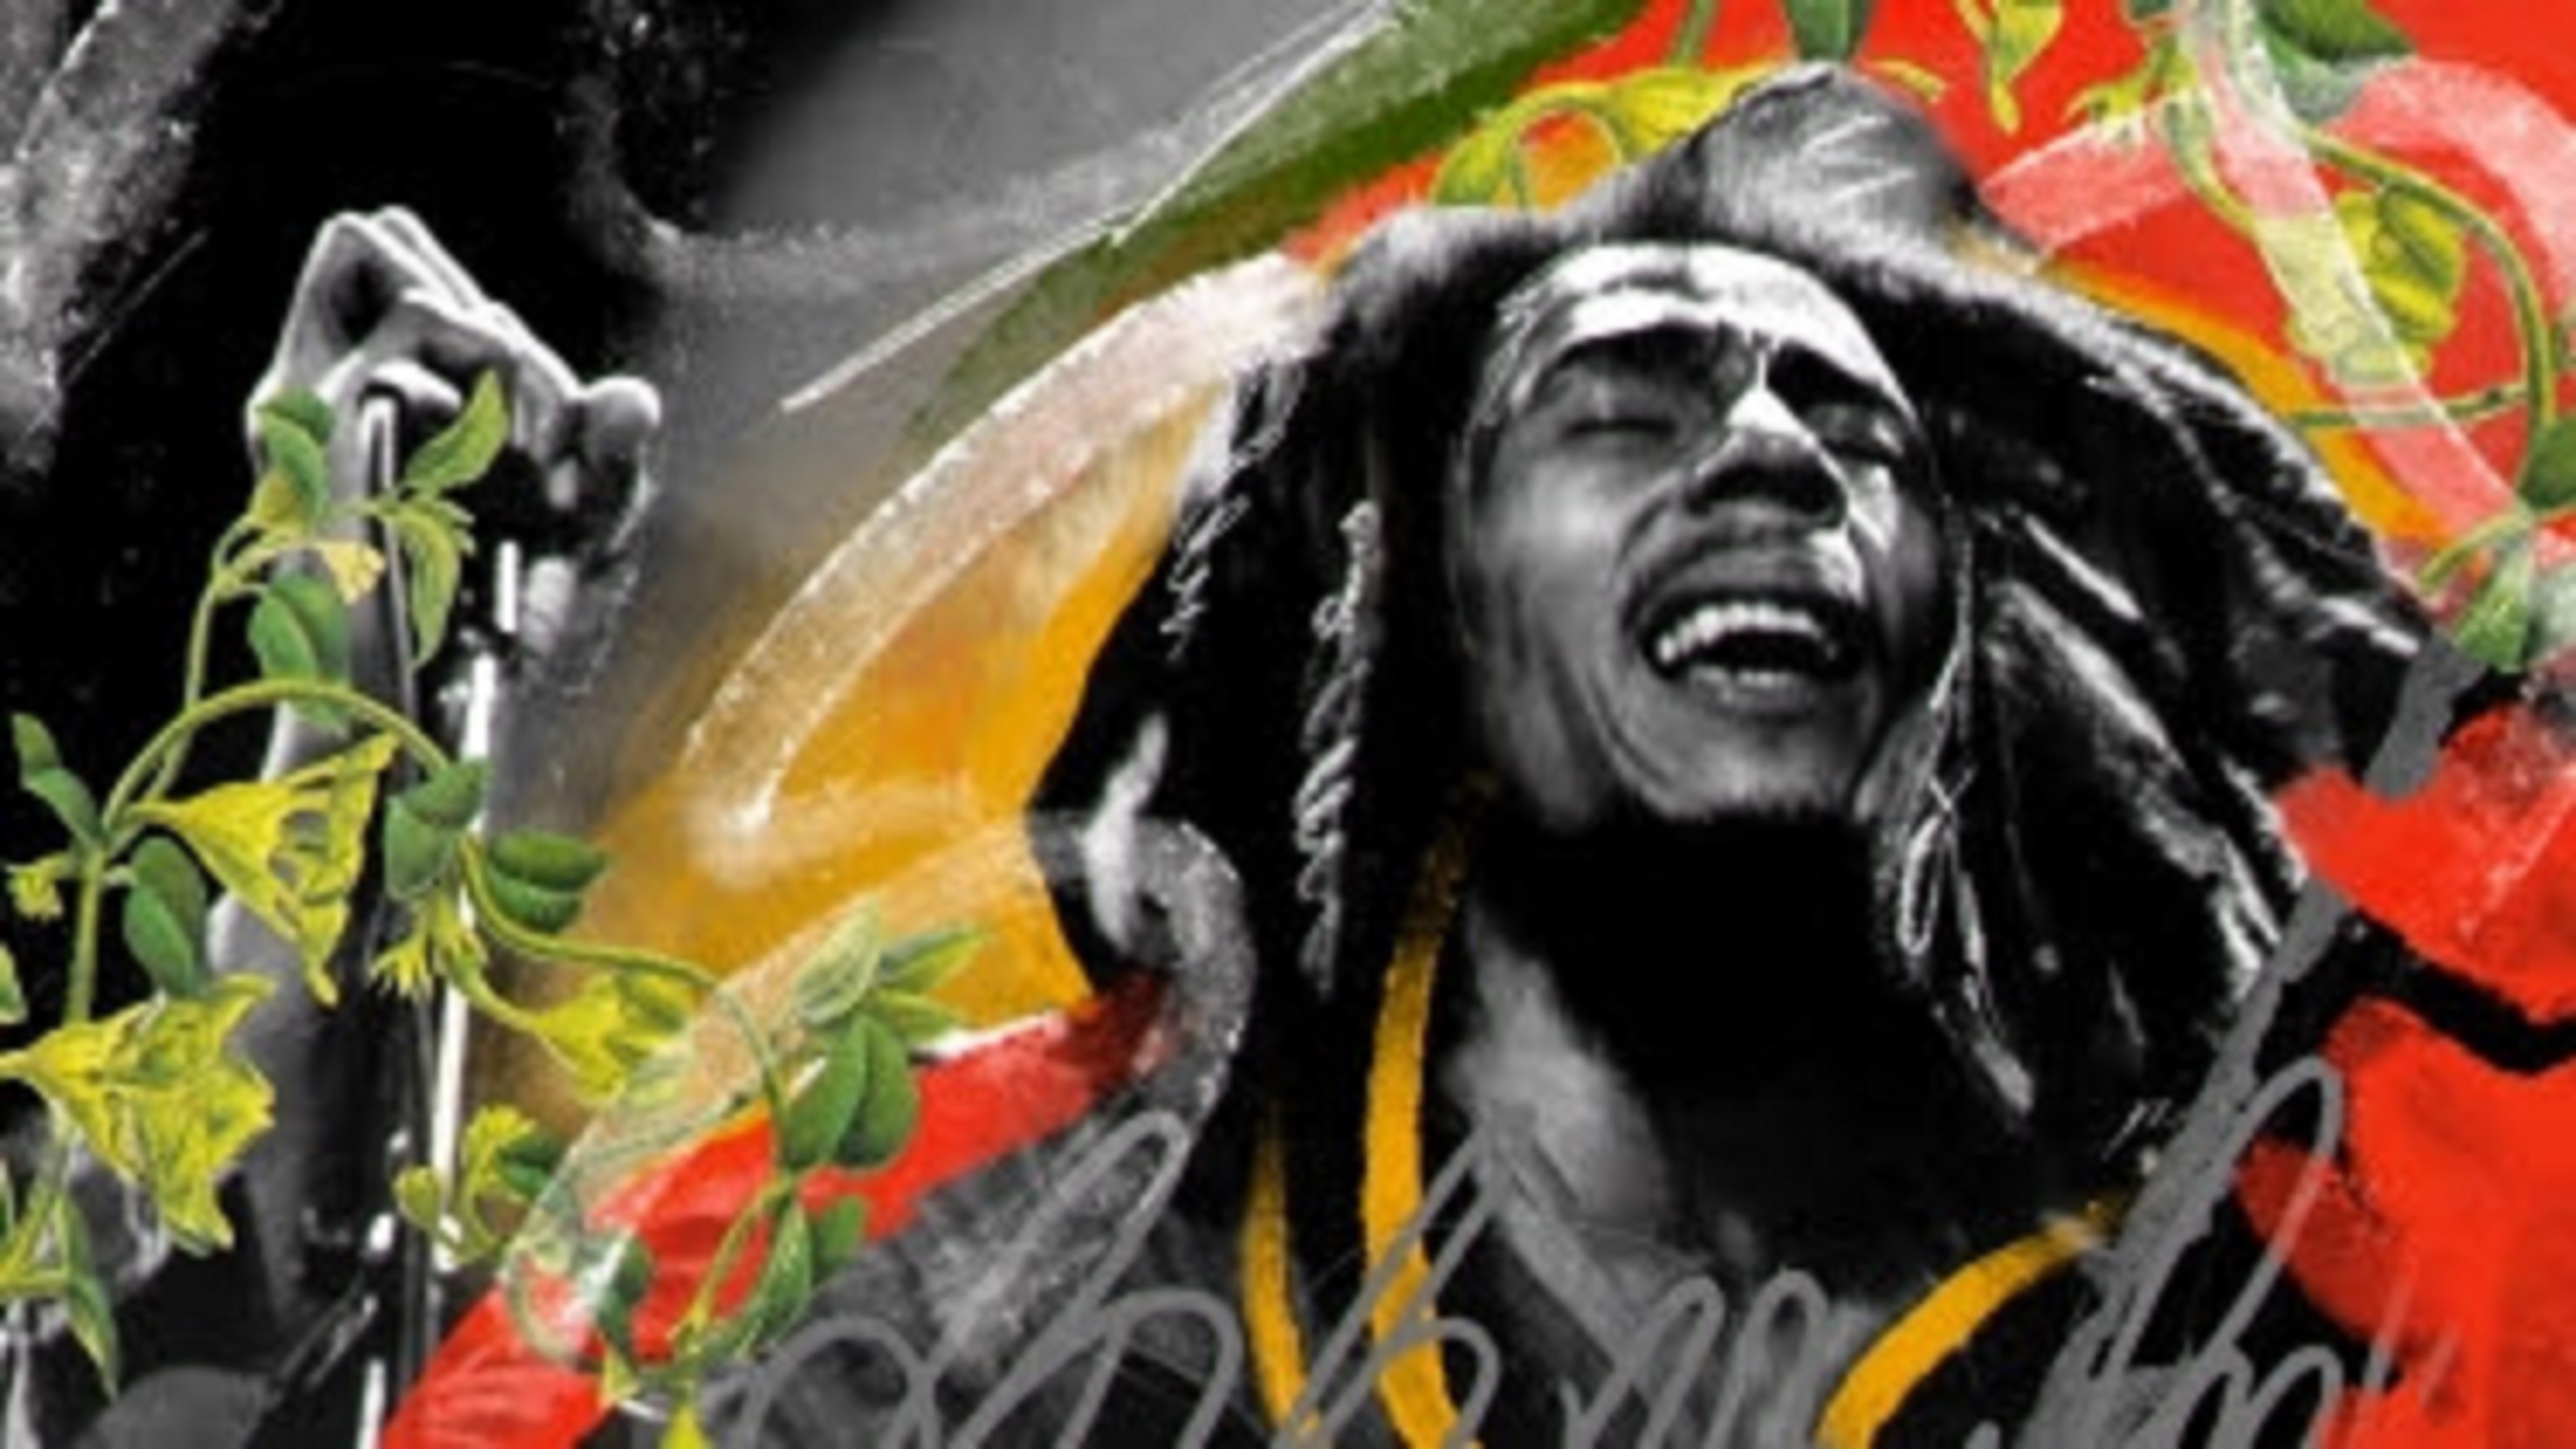 THE SUMMER OF MARLEY CULMINATES WITH A BRAND NEW BOB MARLEY & THE WAILERS’ “EXODUS” LYRIC VIDEO